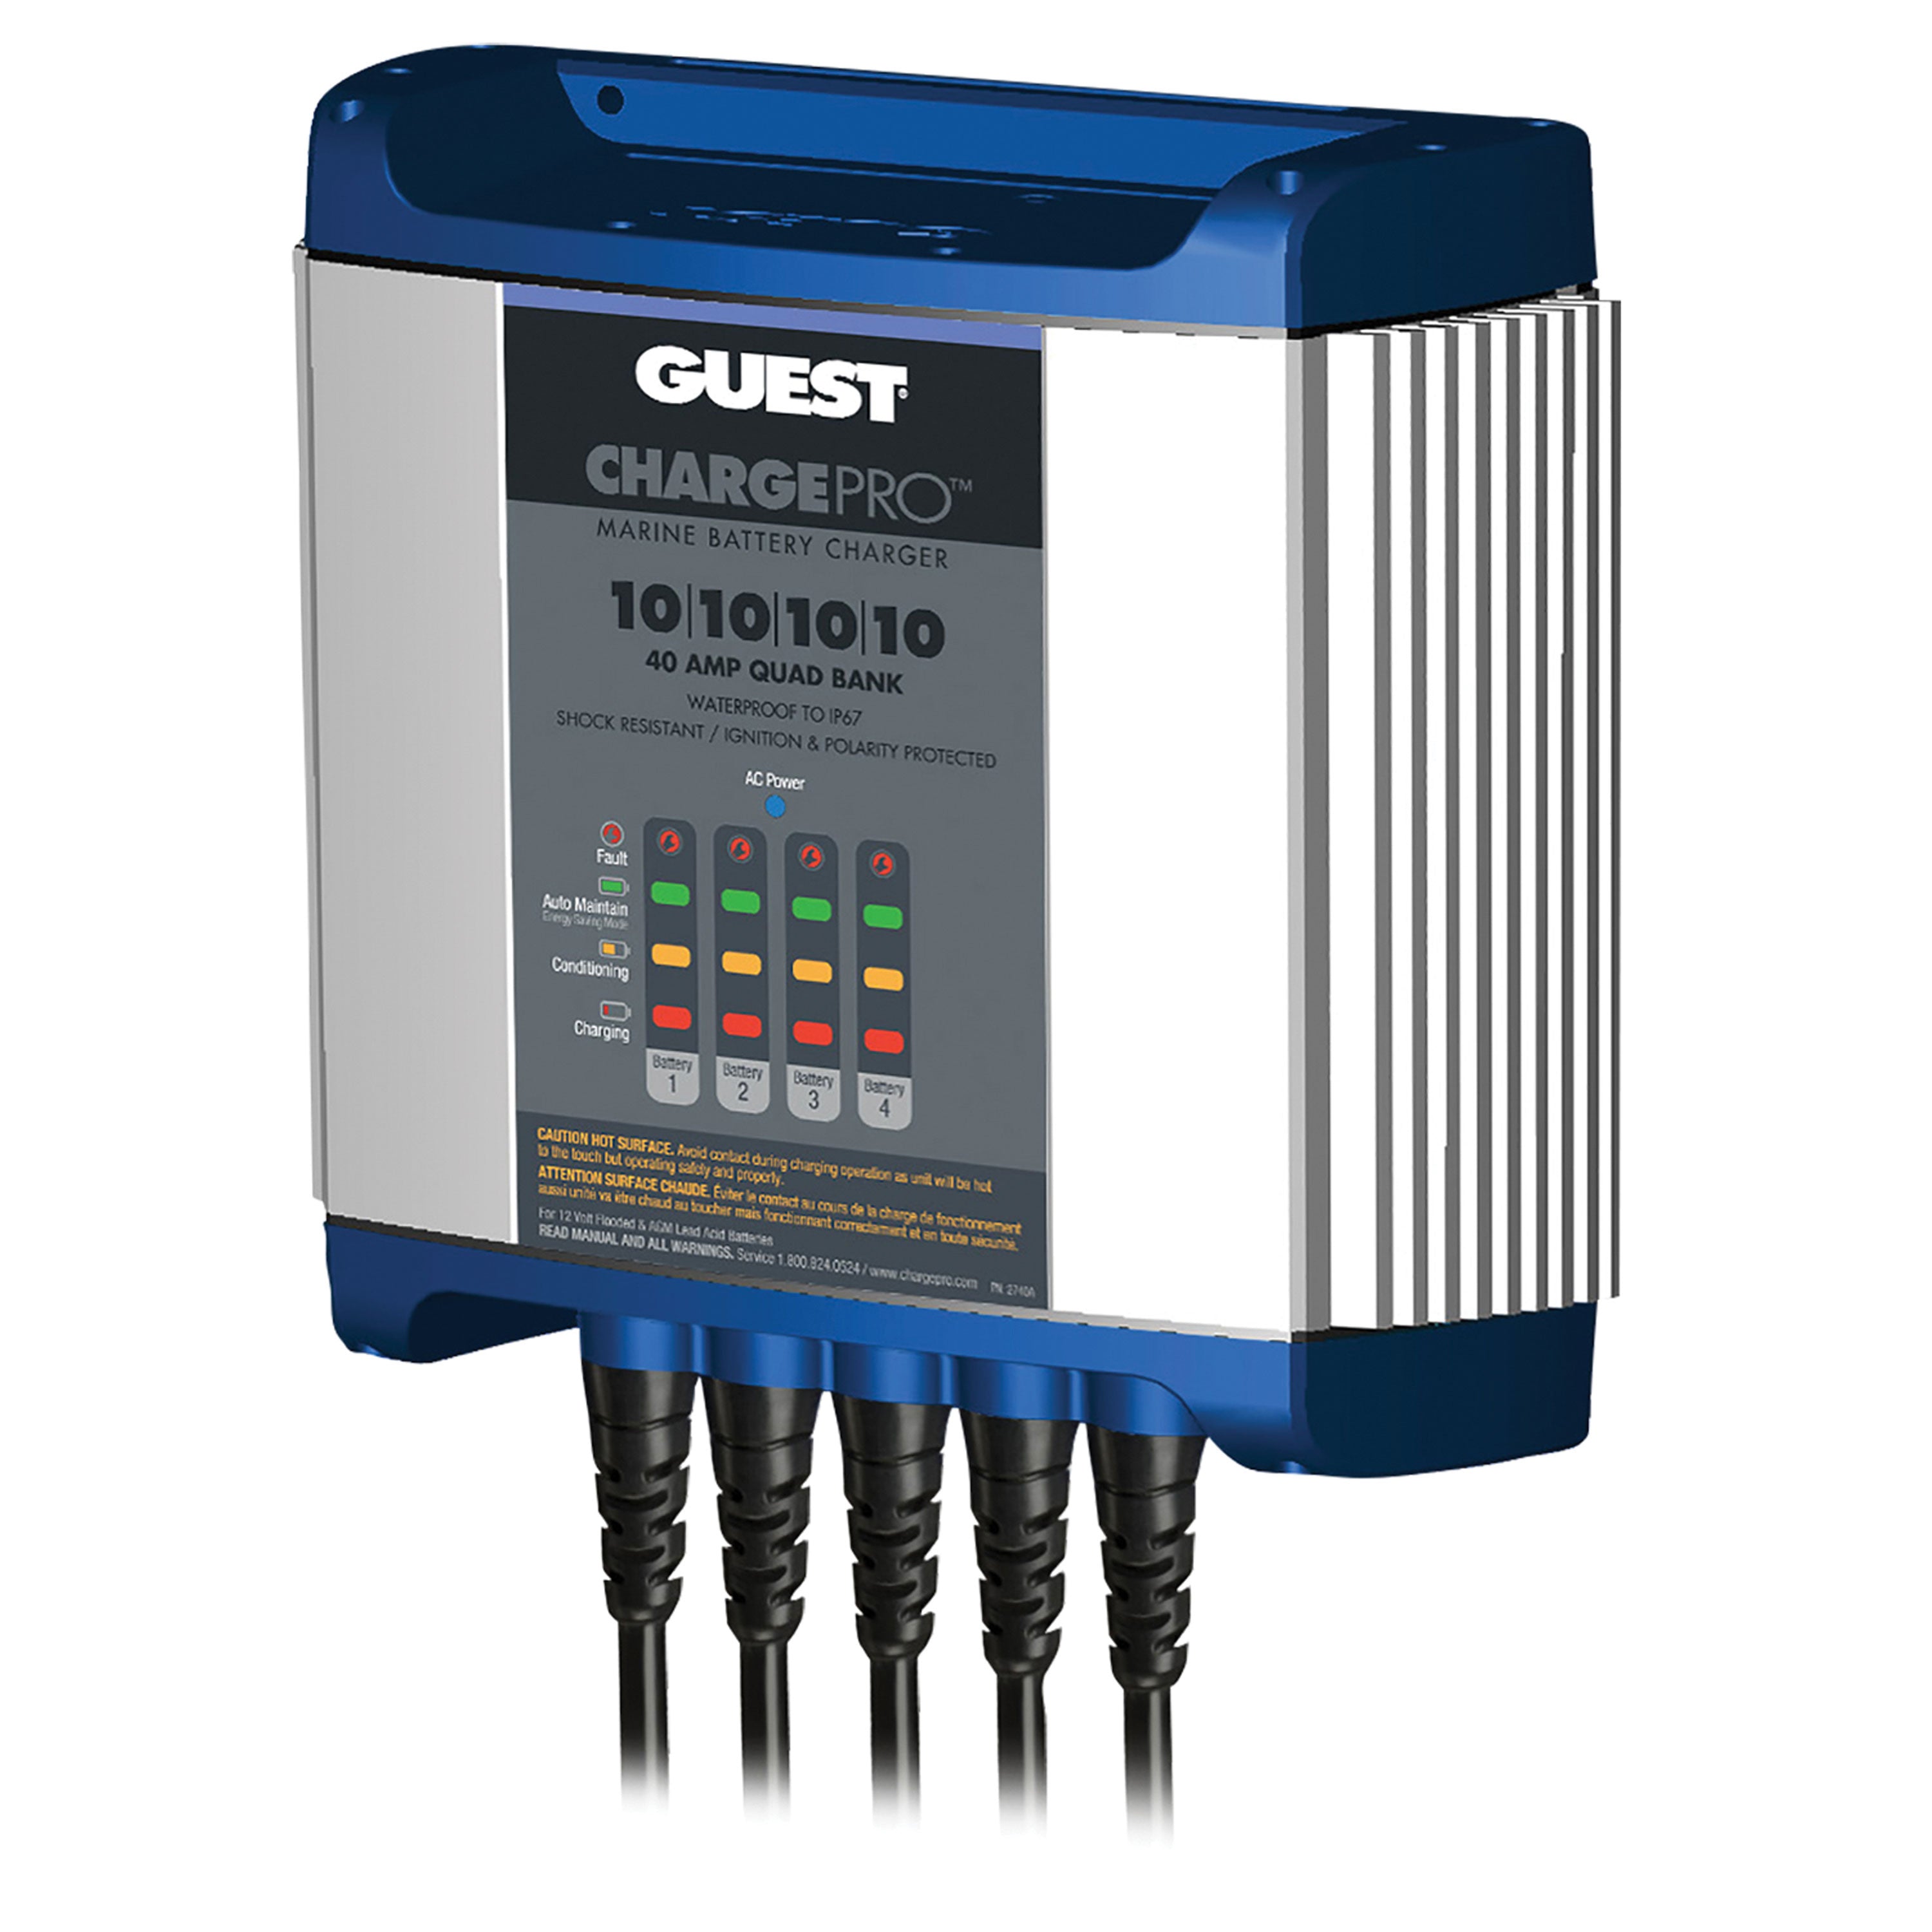 Guest 2740A ChargePro On-Board Battery Charger - 40A/12V, 4 Bank, 120V Input